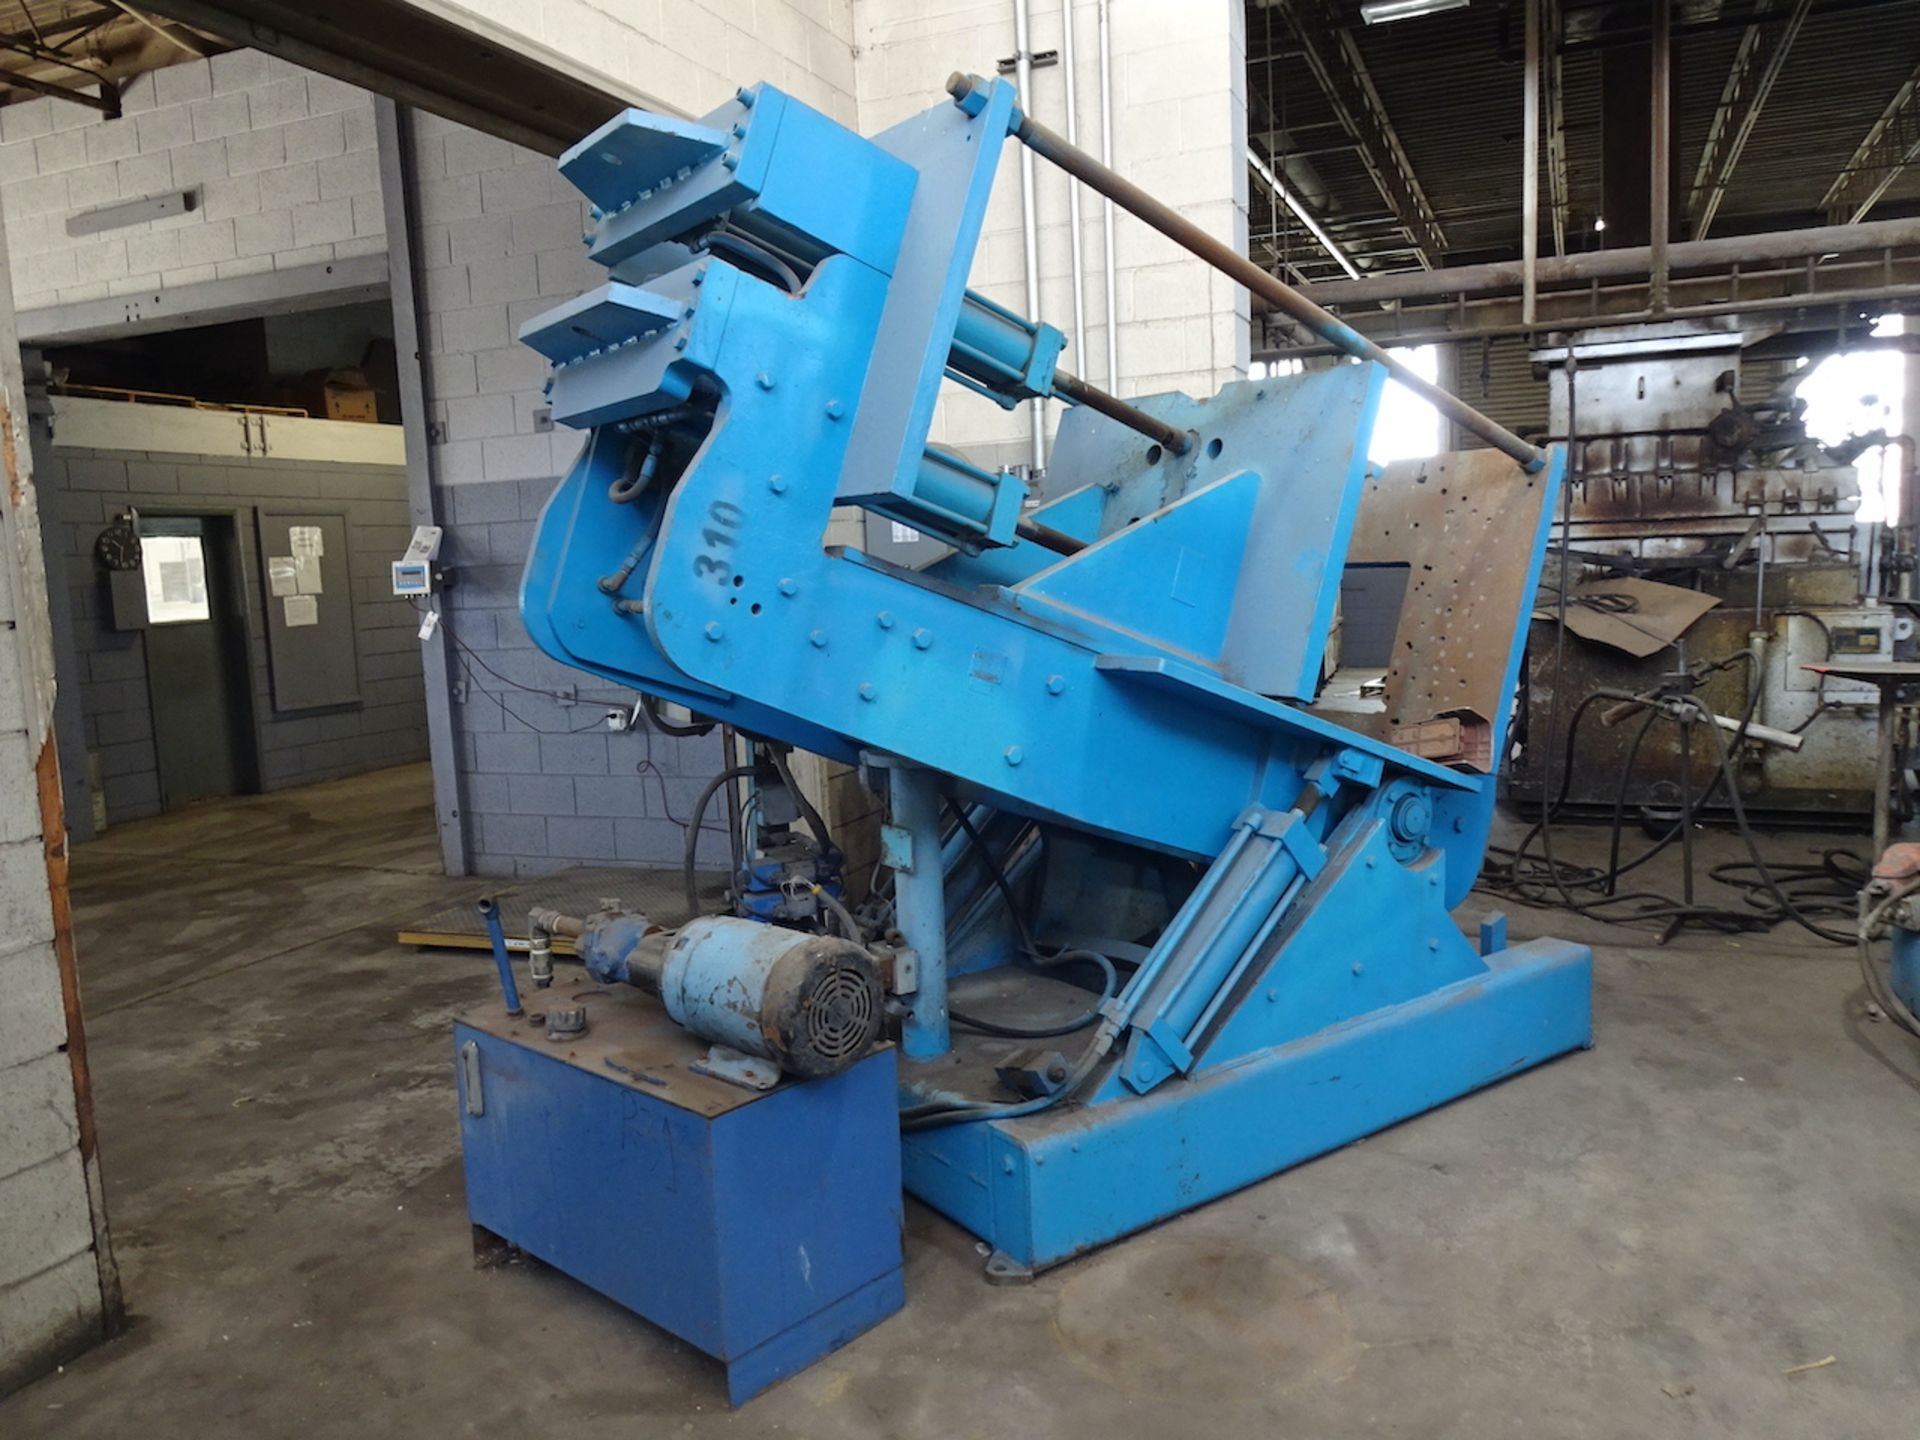 STAHL TILT & POUR PERMANENT MOLD GRAVITY DIE CASTING MACHINE, 46 IN. x 36 IN. (APPROXIMATELY) - Image 2 of 6